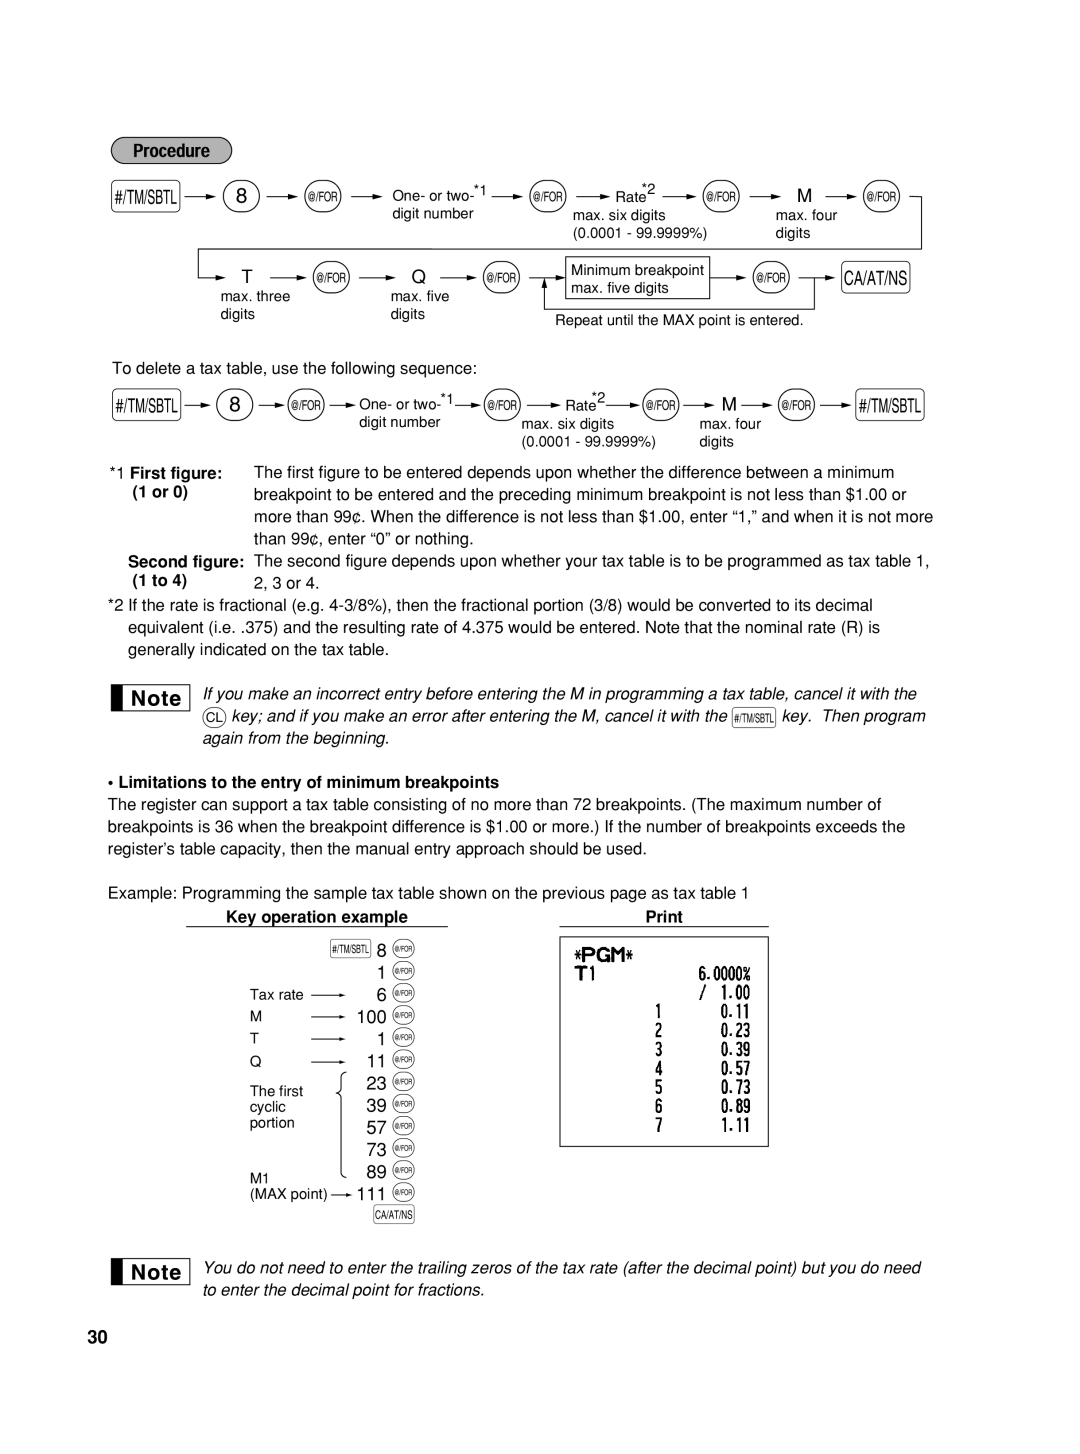 Sharp TINSZ2600RCZZ instruction manual To delete a tax table, use the following sequence 